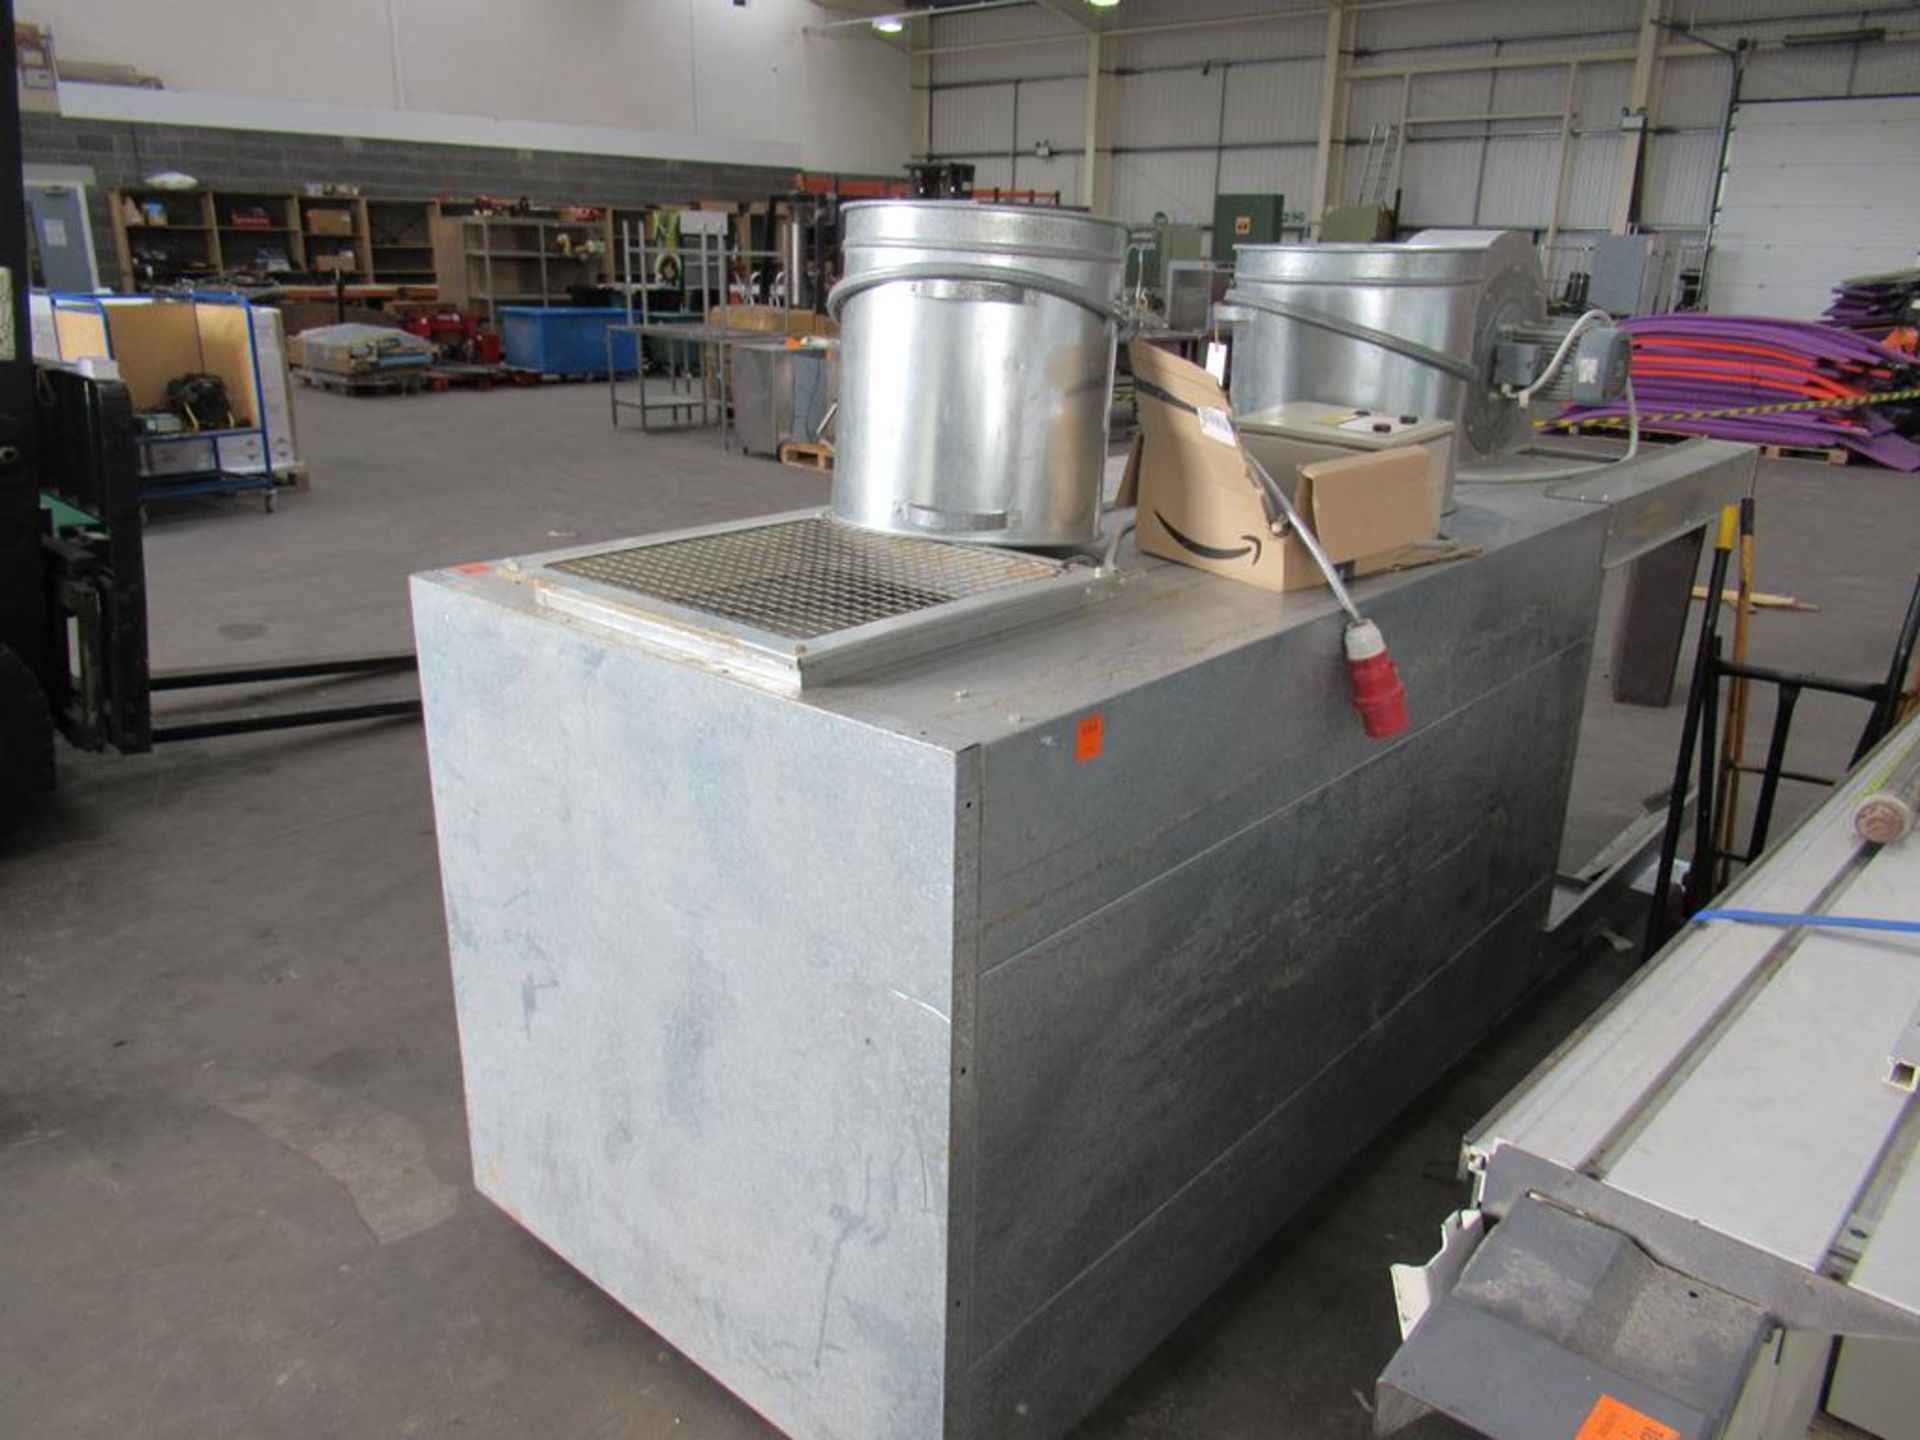 Twin Bin Cabinet Extractor with ATEX Explosion Panel for Fine Dust. - Image 5 of 6